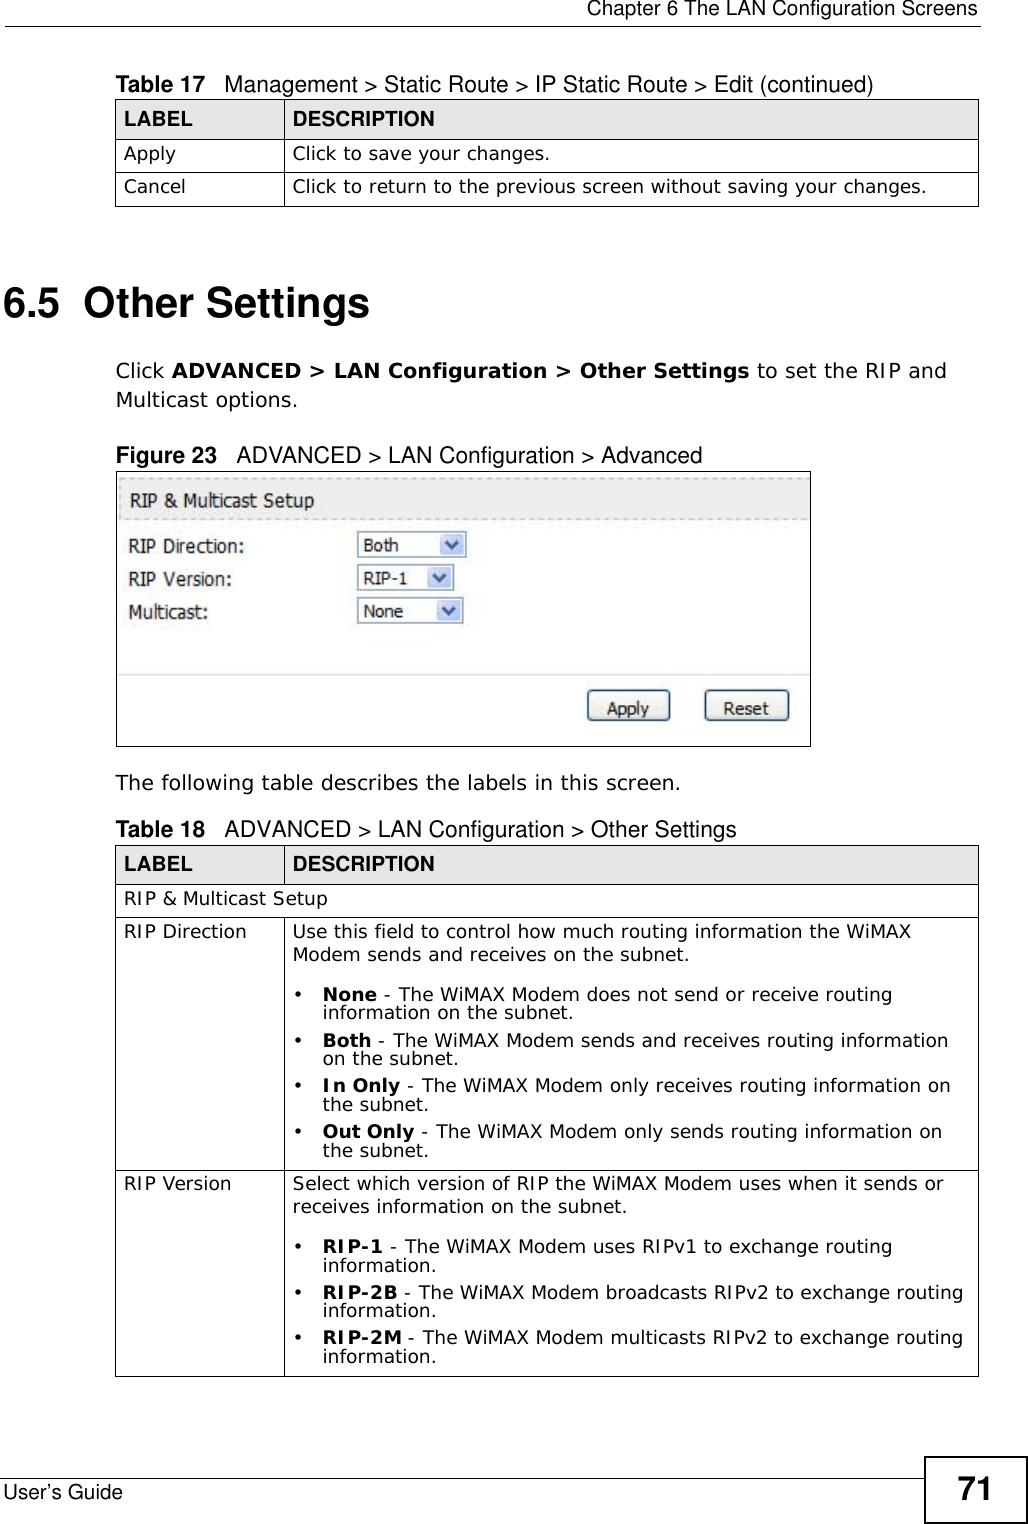  Chapter 6 The LAN Configuration ScreensUser’s Guide 716.5  Other SettingsClick ADVANCED &gt; LAN Configuration &gt; Other Settings to set the RIP and Multicast options.Figure 23   ADVANCED &gt; LAN Configuration &gt; AdvancedThe following table describes the labels in this screen.Apply Click to save your changes.Cancel Click to return to the previous screen without saving your changes.Table 17   Management &gt; Static Route &gt; IP Static Route &gt; Edit (continued)LABEL DESCRIPTIONTable 18   ADVANCED &gt; LAN Configuration &gt; Other SettingsLABEL DESCRIPTIONRIP &amp; Multicast SetupRIP Direction Use this field to control how much routing information the WiMAX Modem sends and receives on the subnet.•None - The WiMAX Modem does not send or receive routing information on the subnet.•Both - The WiMAX Modem sends and receives routing information on the subnet.•In Only - The WiMAX Modem only receives routing information on the subnet.•Out Only - The WiMAX Modem only sends routing information on the subnet.RIP Version Select which version of RIP the WiMAX Modem uses when it sends or receives information on the subnet.•RIP-1 - The WiMAX Modem uses RIPv1 to exchange routing information.•RIP-2B - The WiMAX Modem broadcasts RIPv2 to exchange routing information.•RIP-2M - The WiMAX Modem multicasts RIPv2 to exchange routing information.